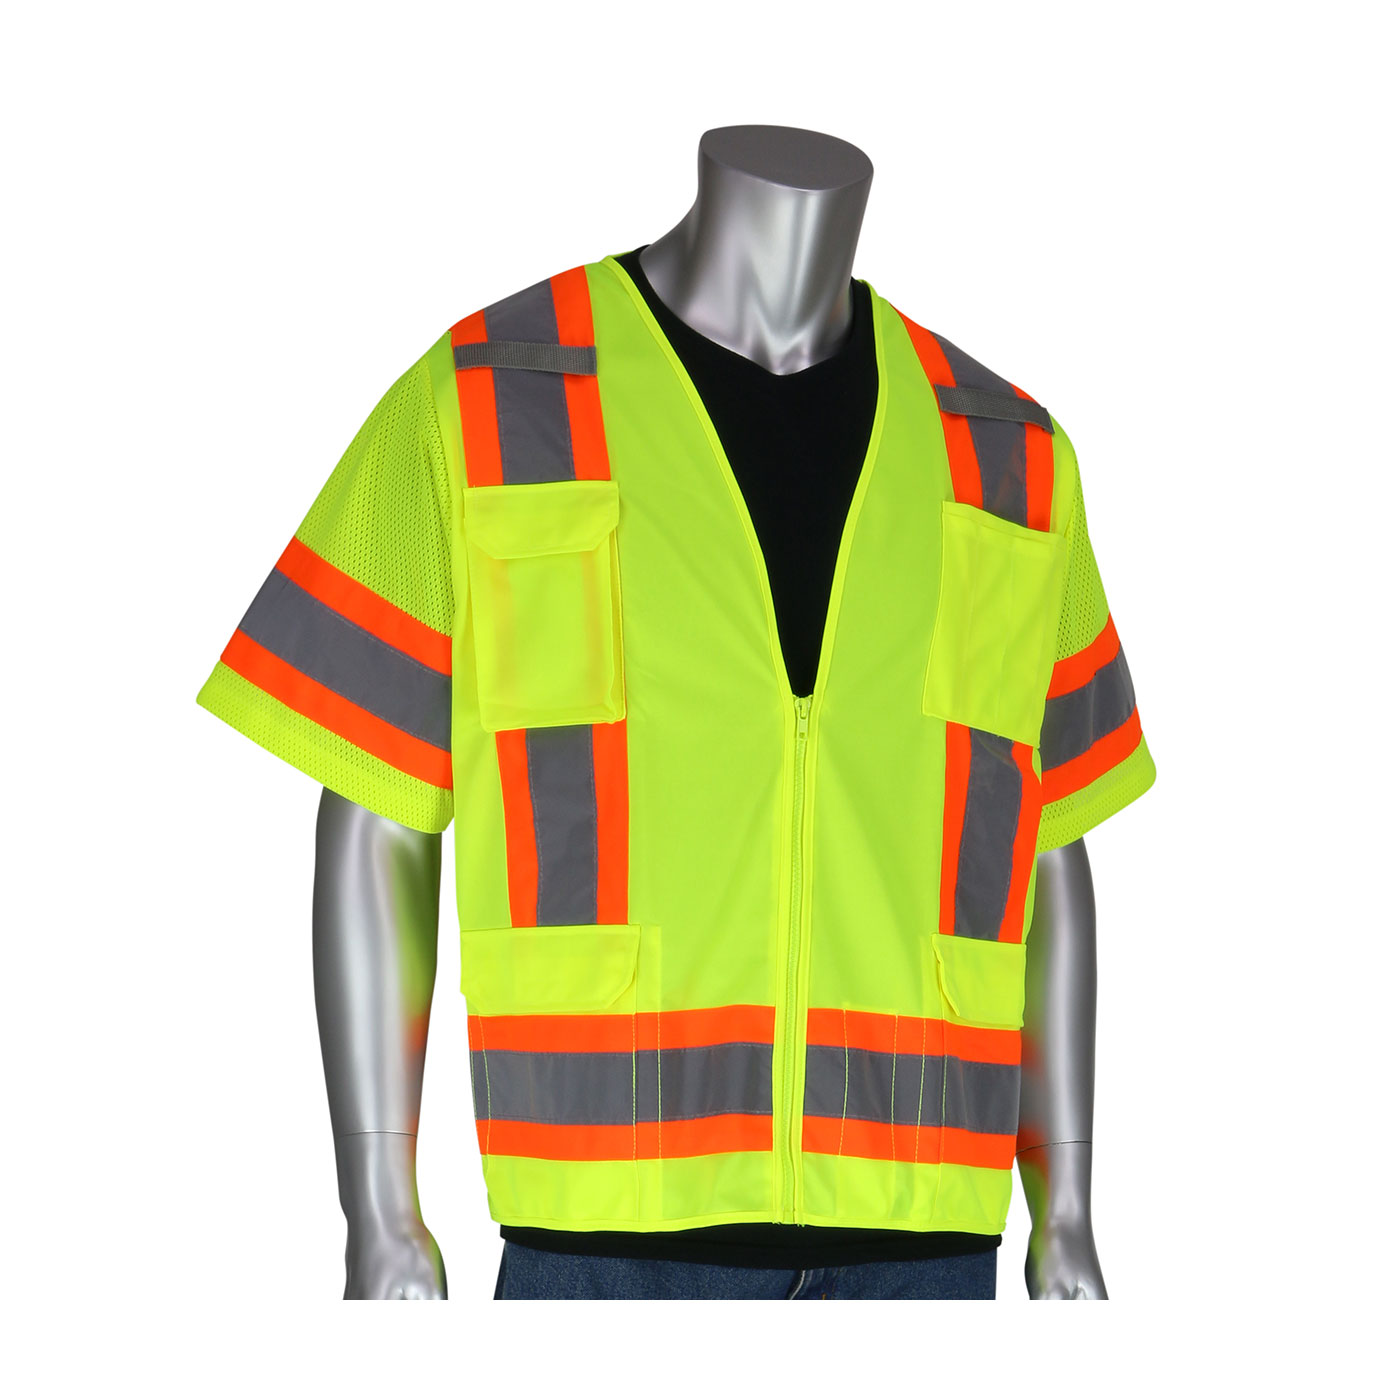 PIP 303-0500-LY/2X ANSI Type R Class 3 Two-Tone Yellow Surveyor Eleven Pocket Vest - 2X-Large PID-3030500LY 2X